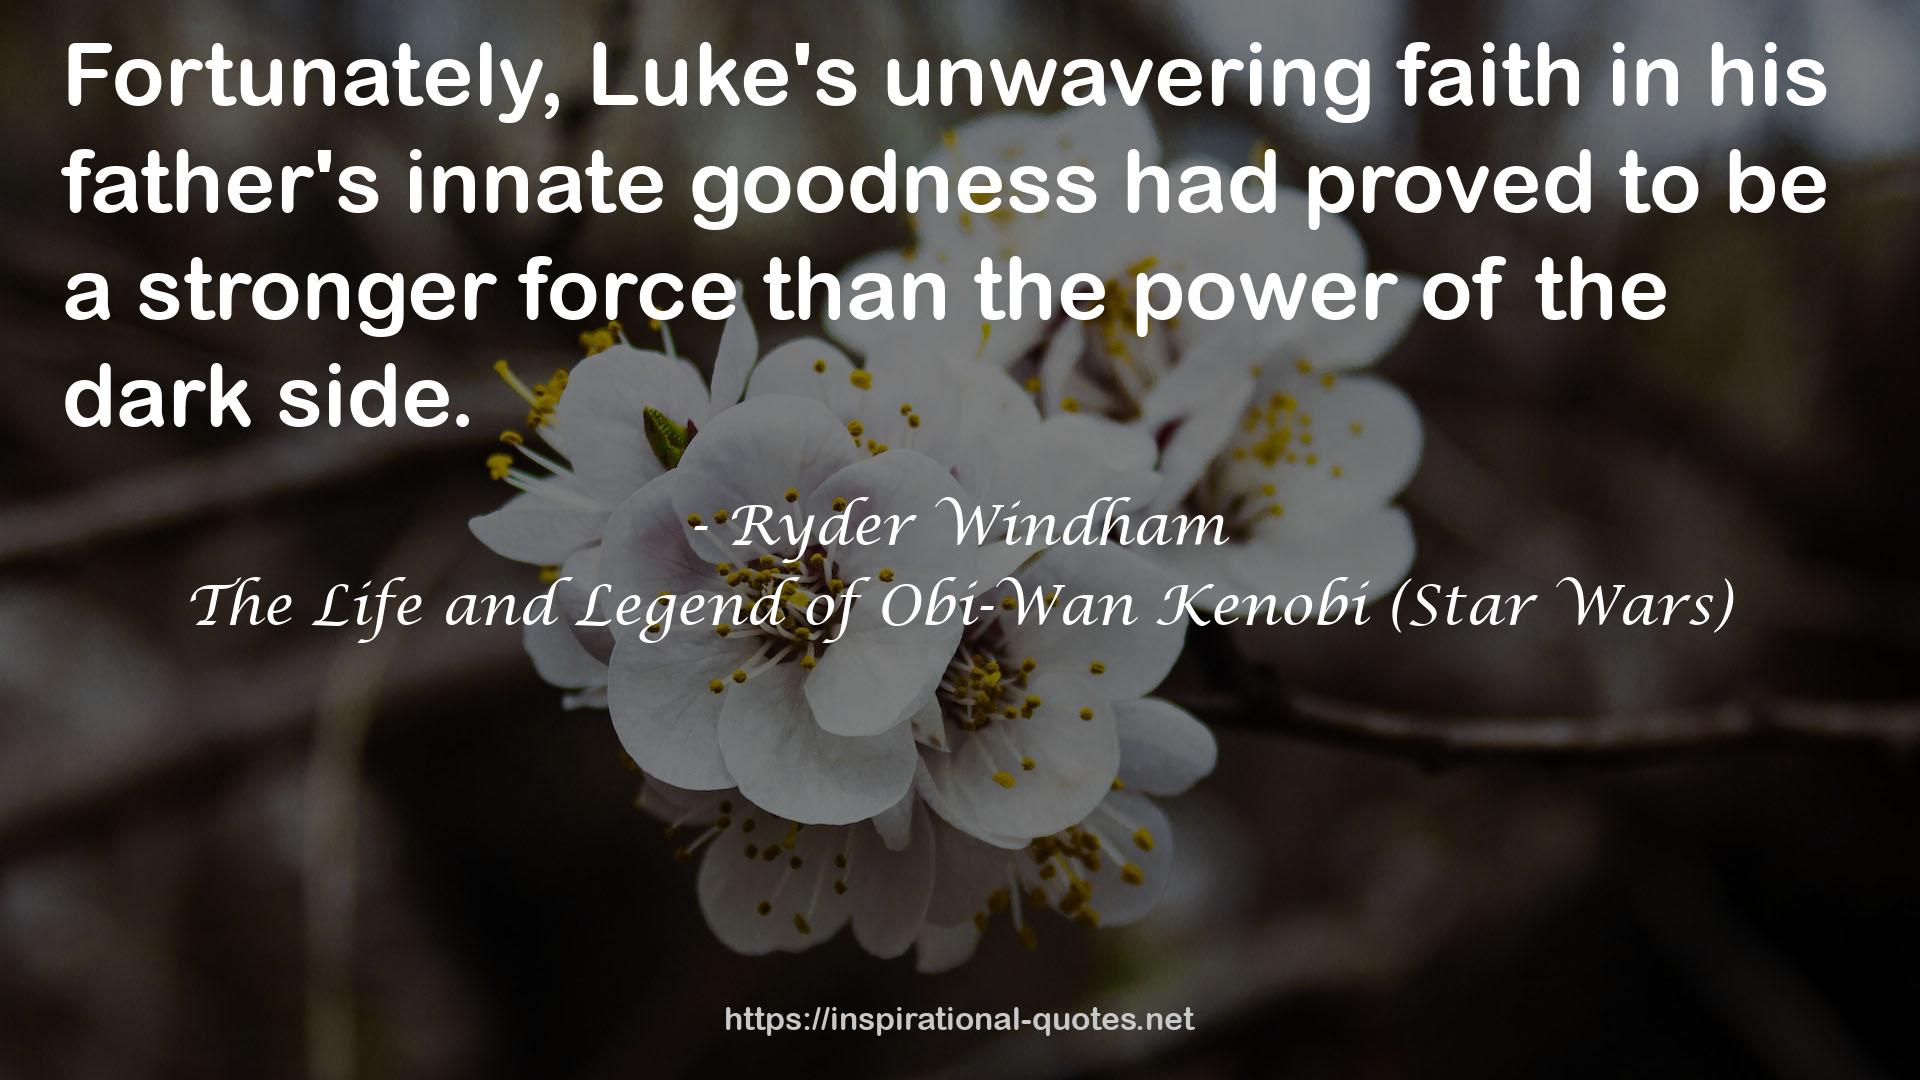 Ryder Windham QUOTES